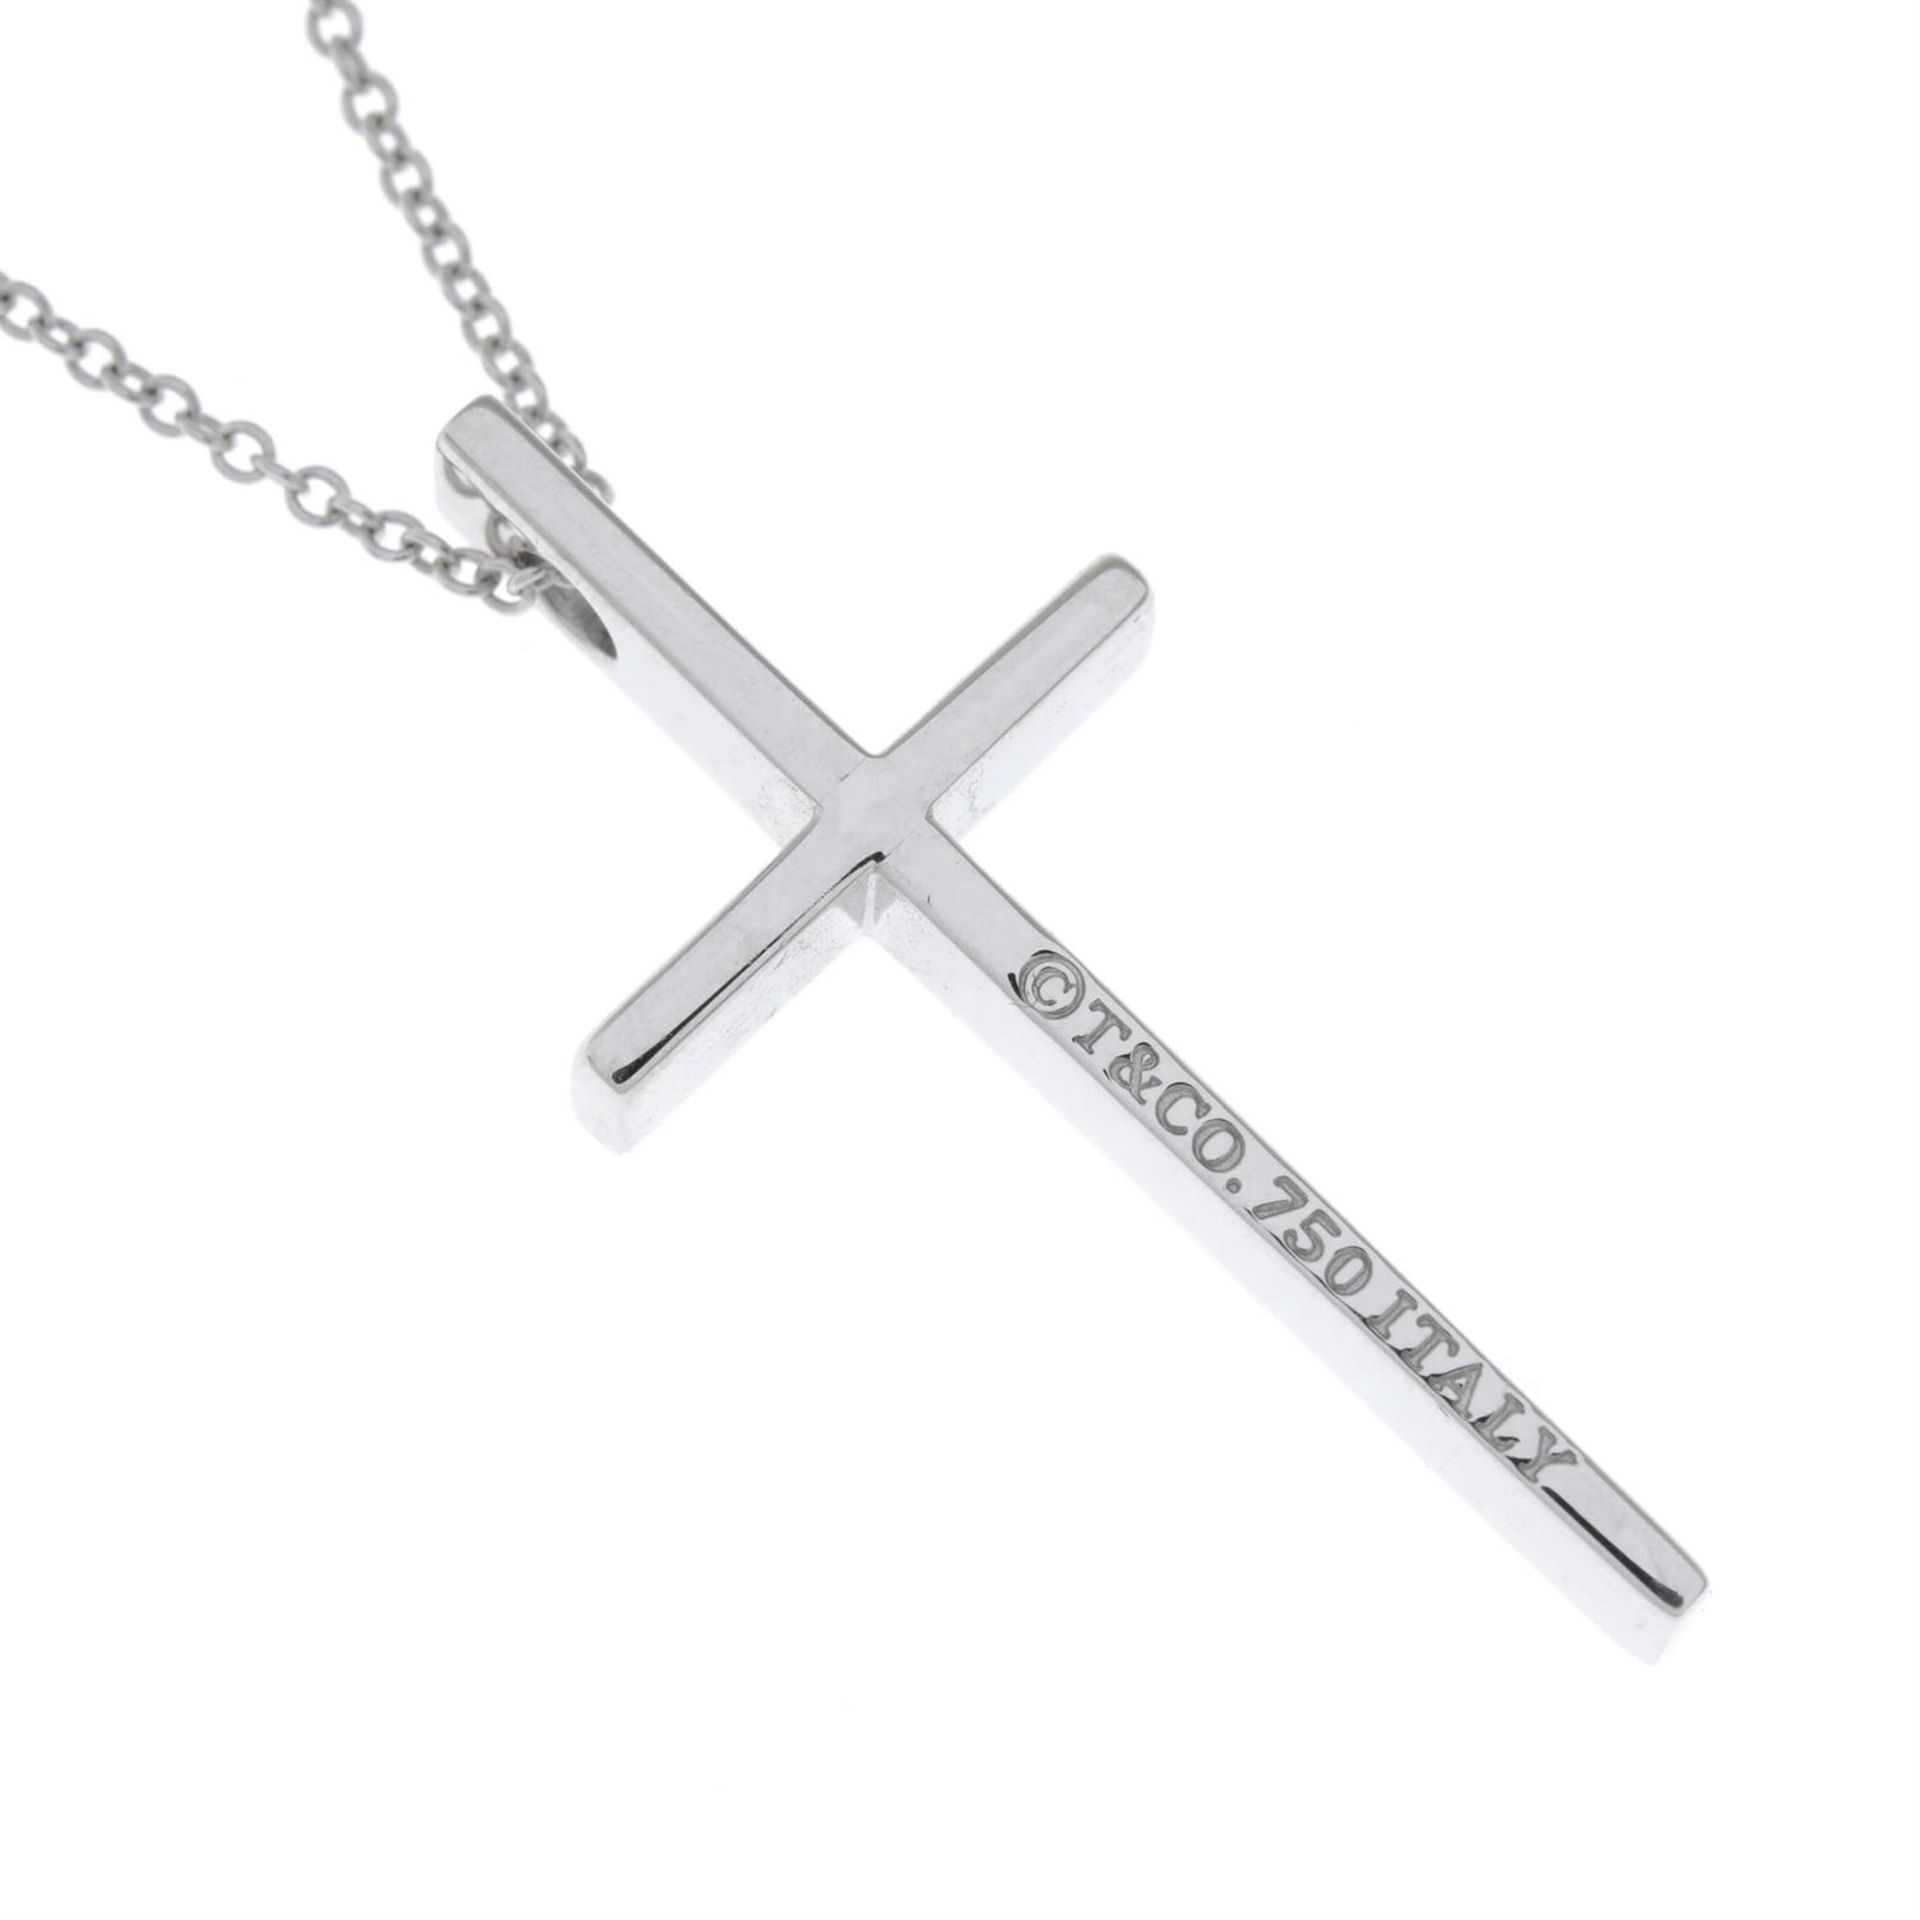 A cross pendant, with chain, by Tiffany & Co. - Image 3 of 3